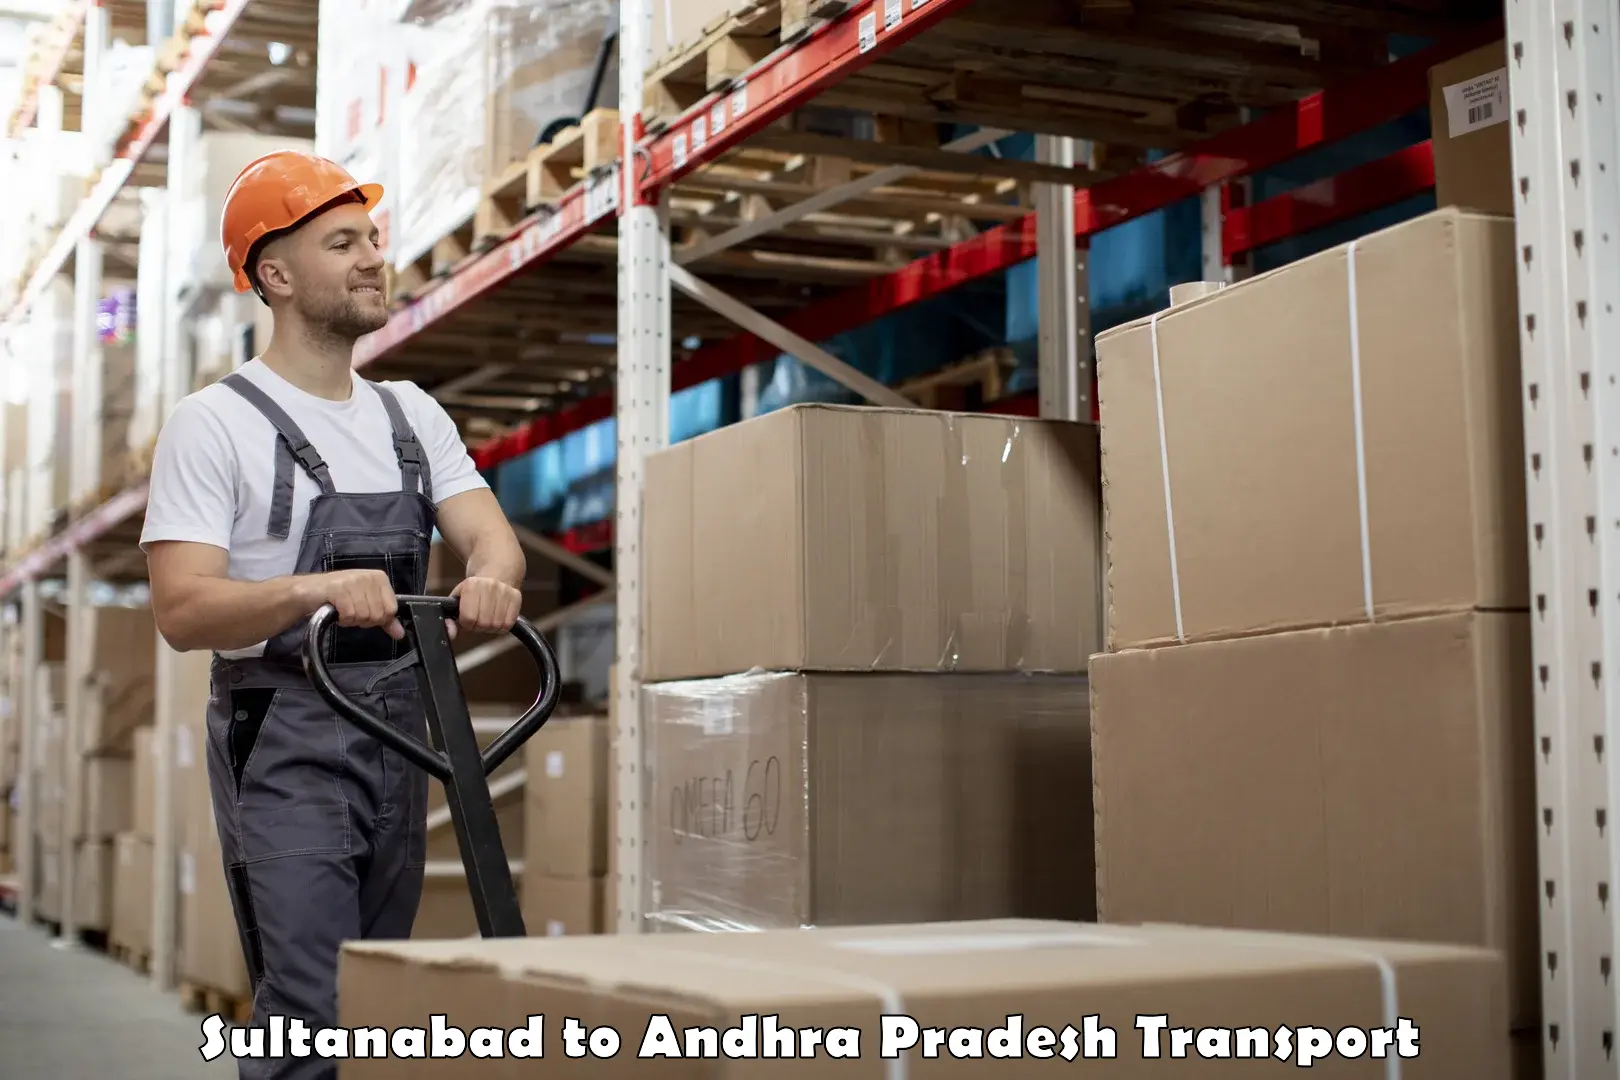 Truck transport companies in India Sultanabad to Etcherla